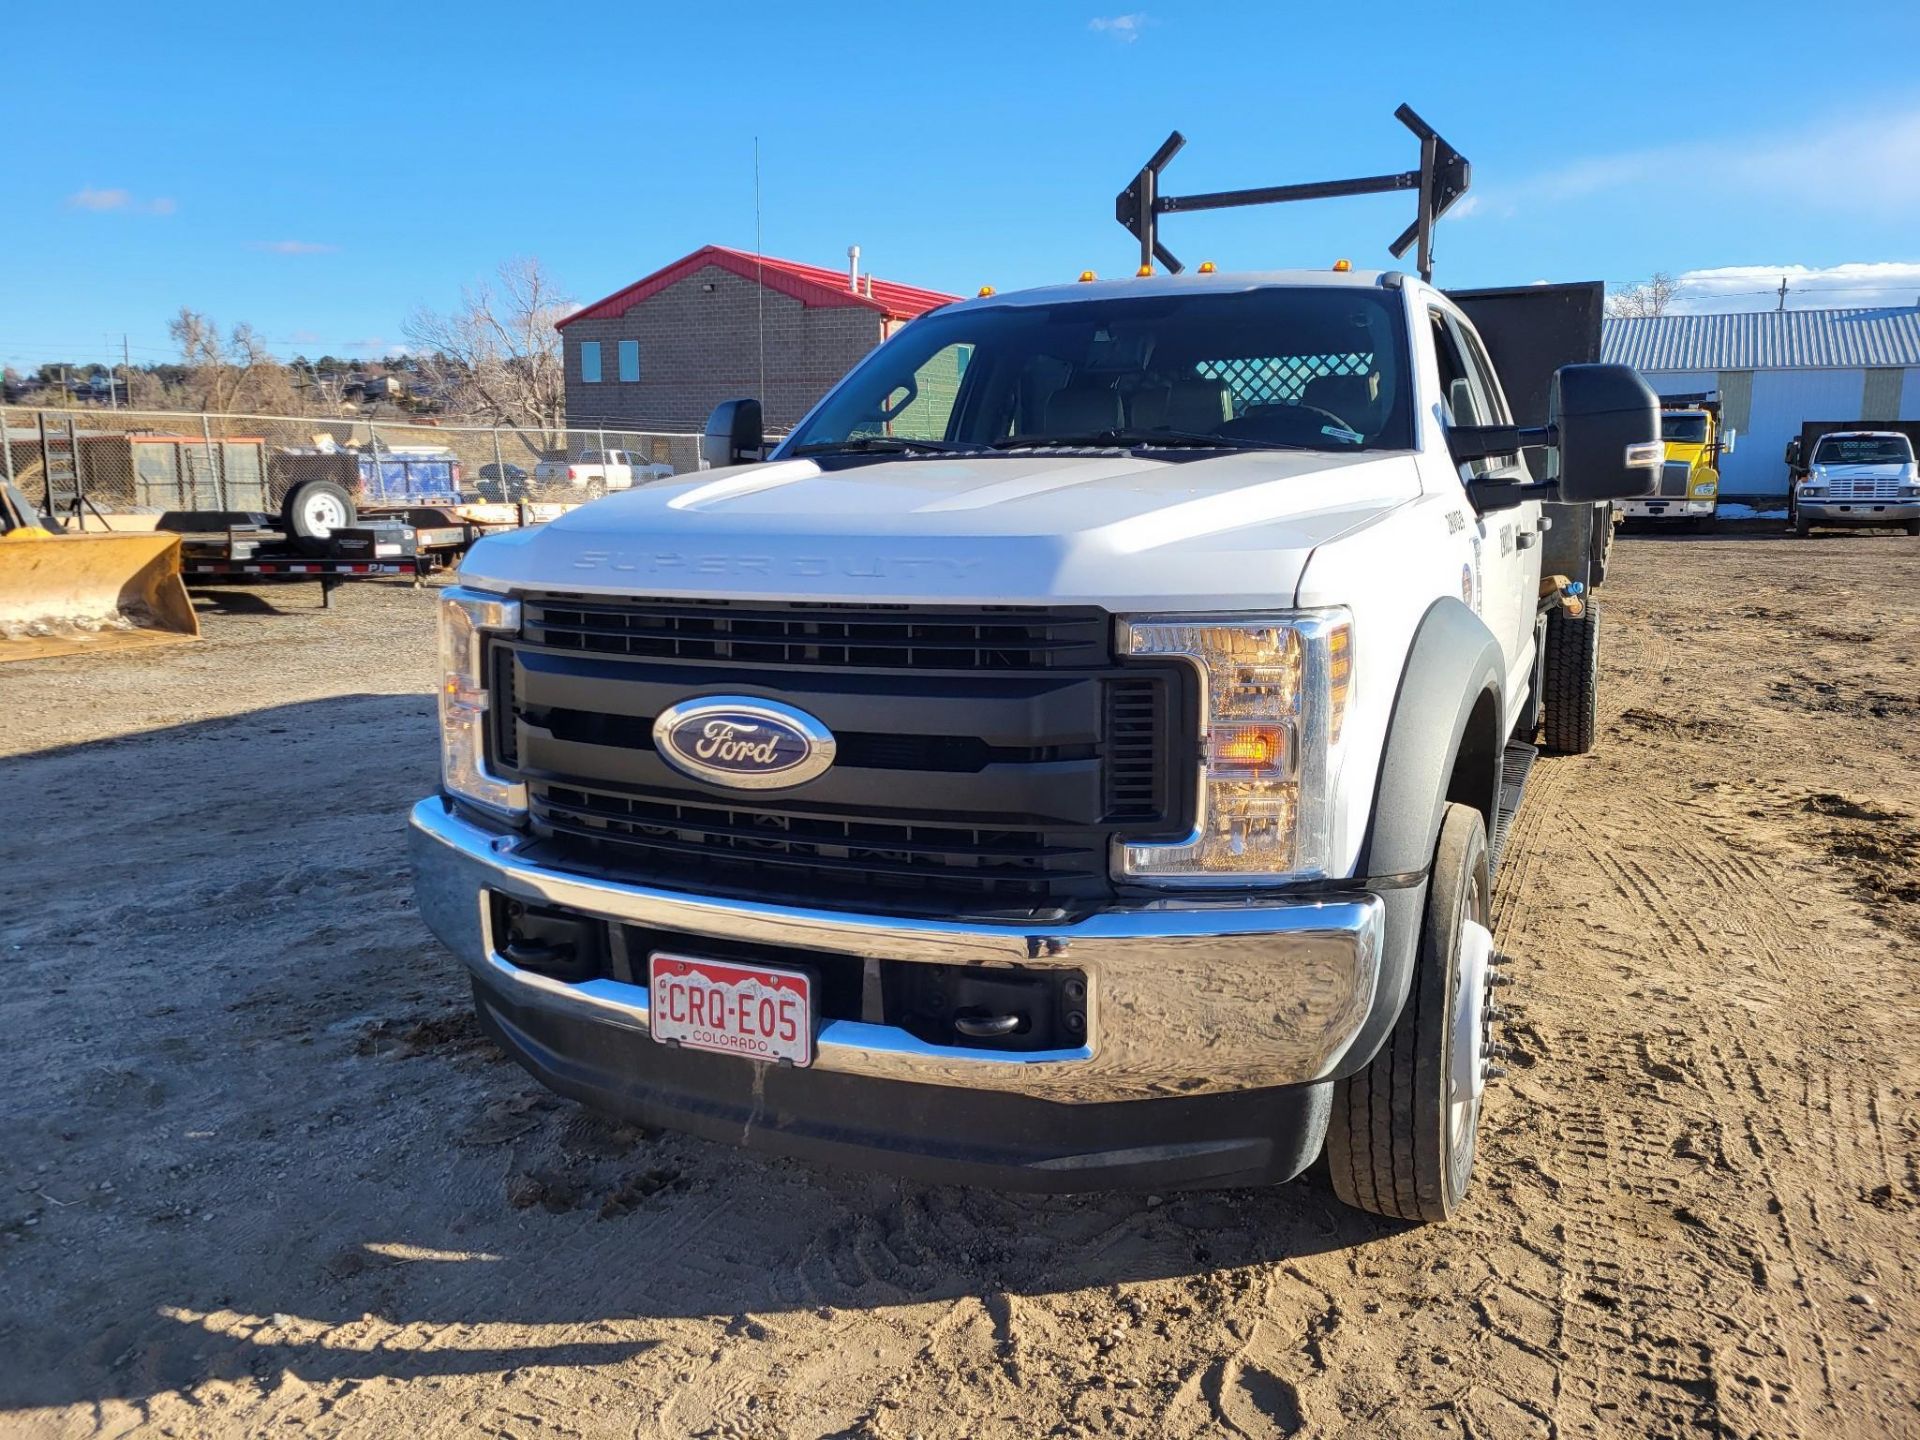 2019 FORD F550 CREW CAB DIESEL DUALLY DUMP TRUCK 31,872 MILES - Image 2 of 34